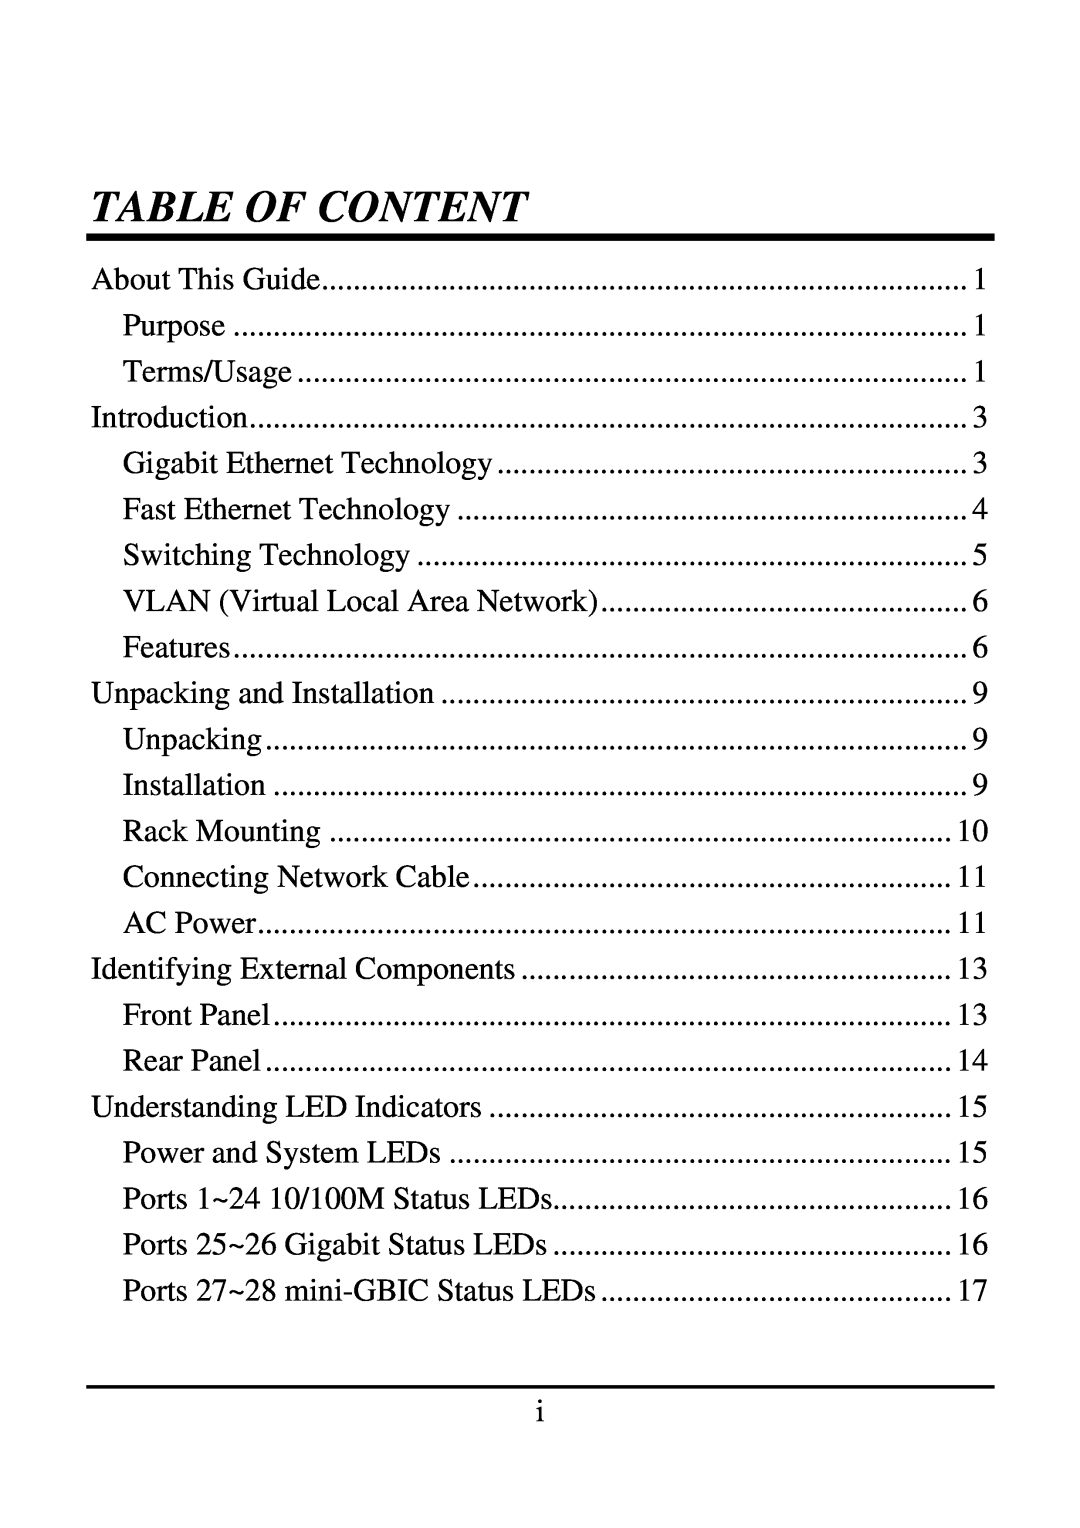 TRENDnet 21000BASE-T manual Table Of Content, Gigabit Ethernet Technology, VLAN Virtual Local Area Network, Rack Mounting 